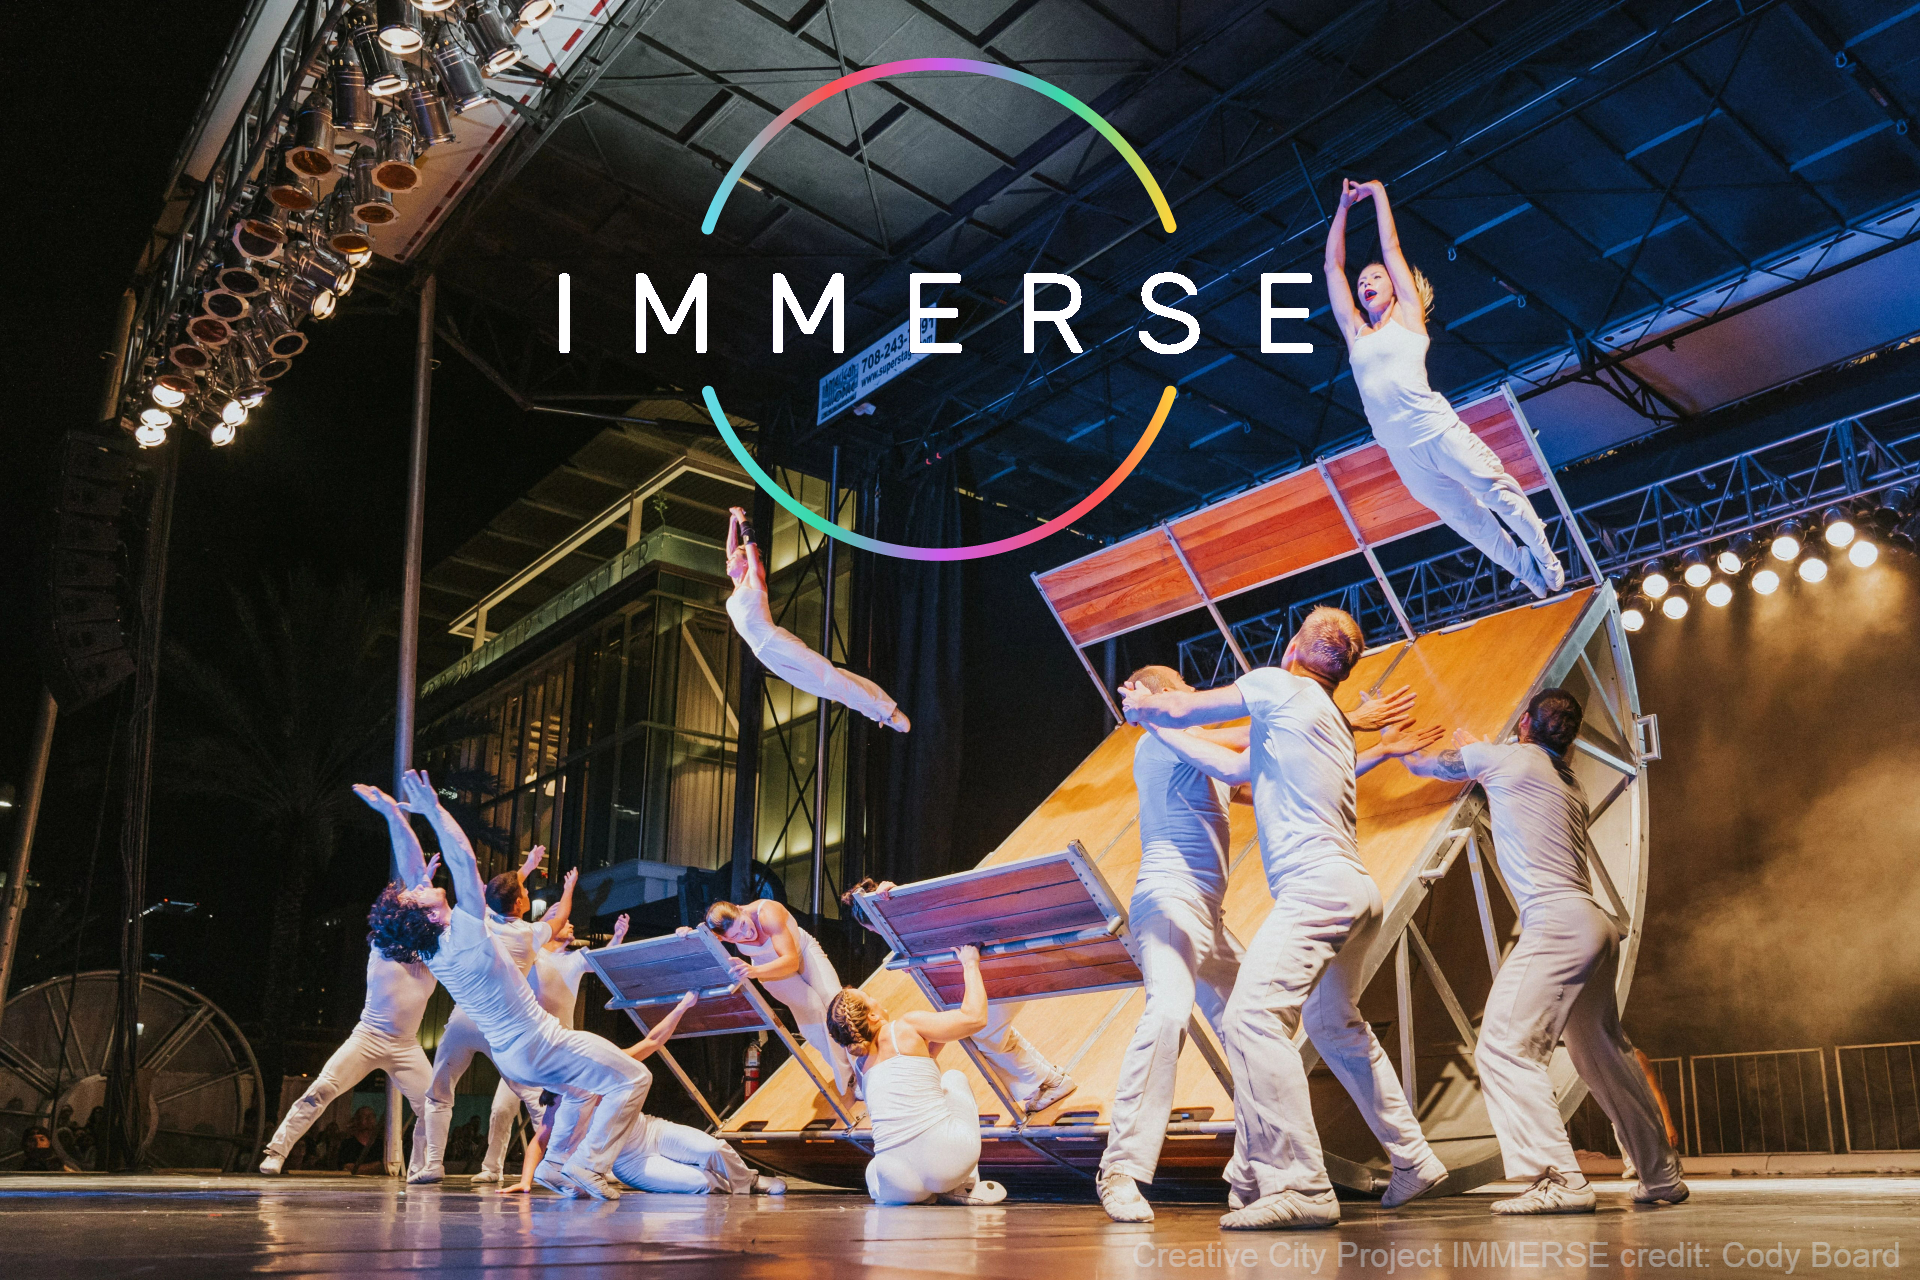  IMMERSE, the annual performing and interactive arts event takes place tonight and tomorrow night in downtown Orlando.